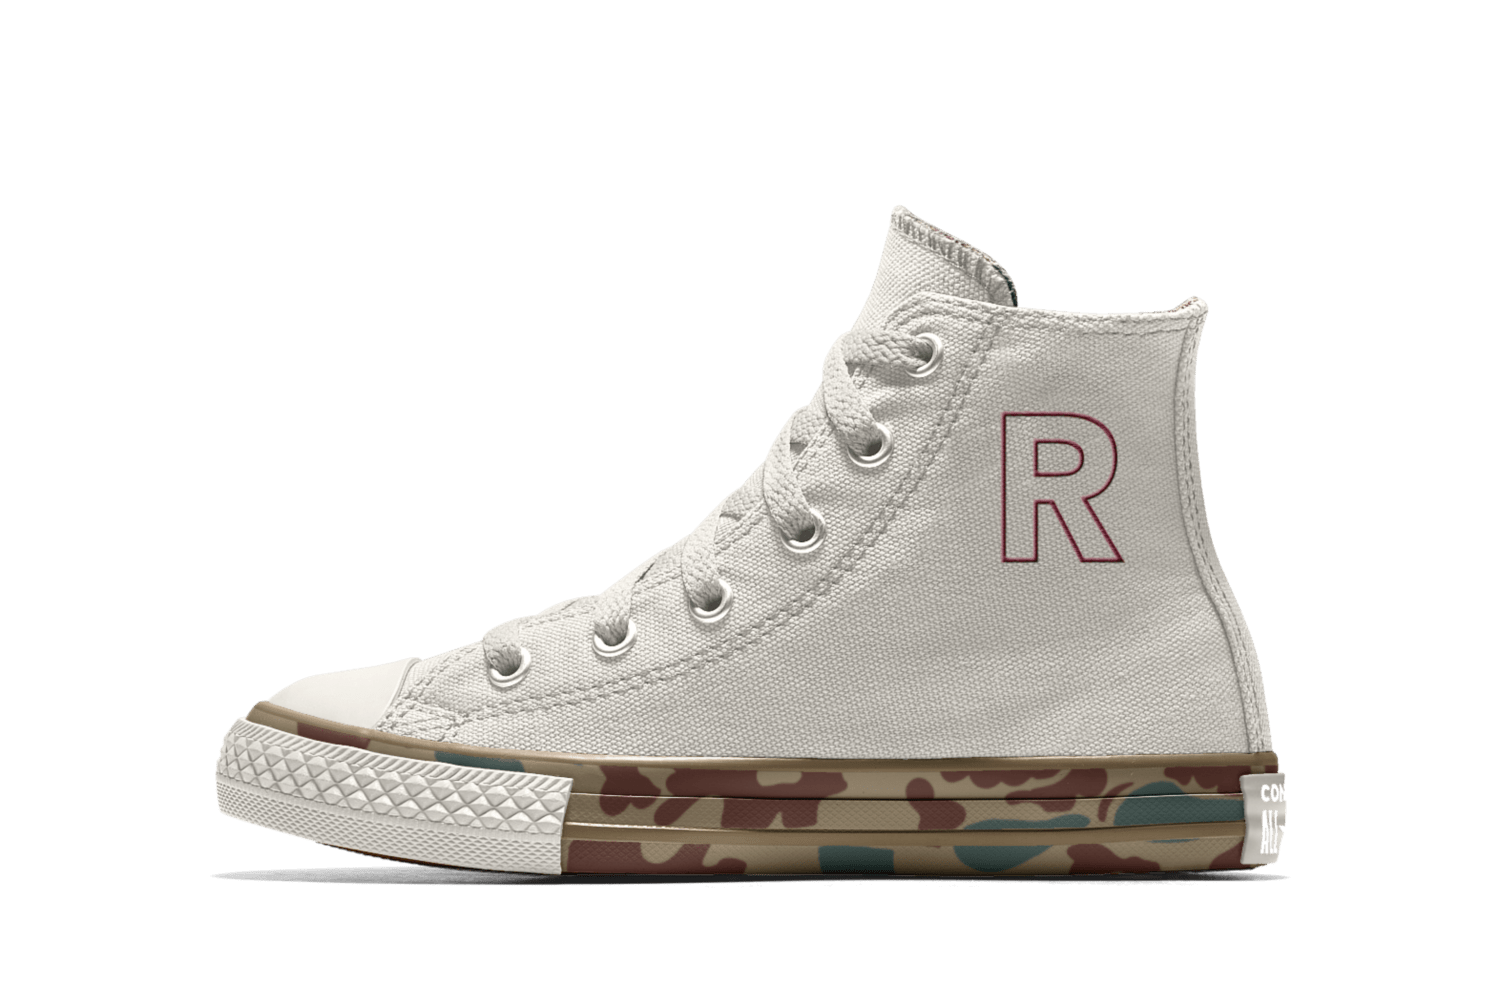 Customize Your Own Converse Chuck Taylor